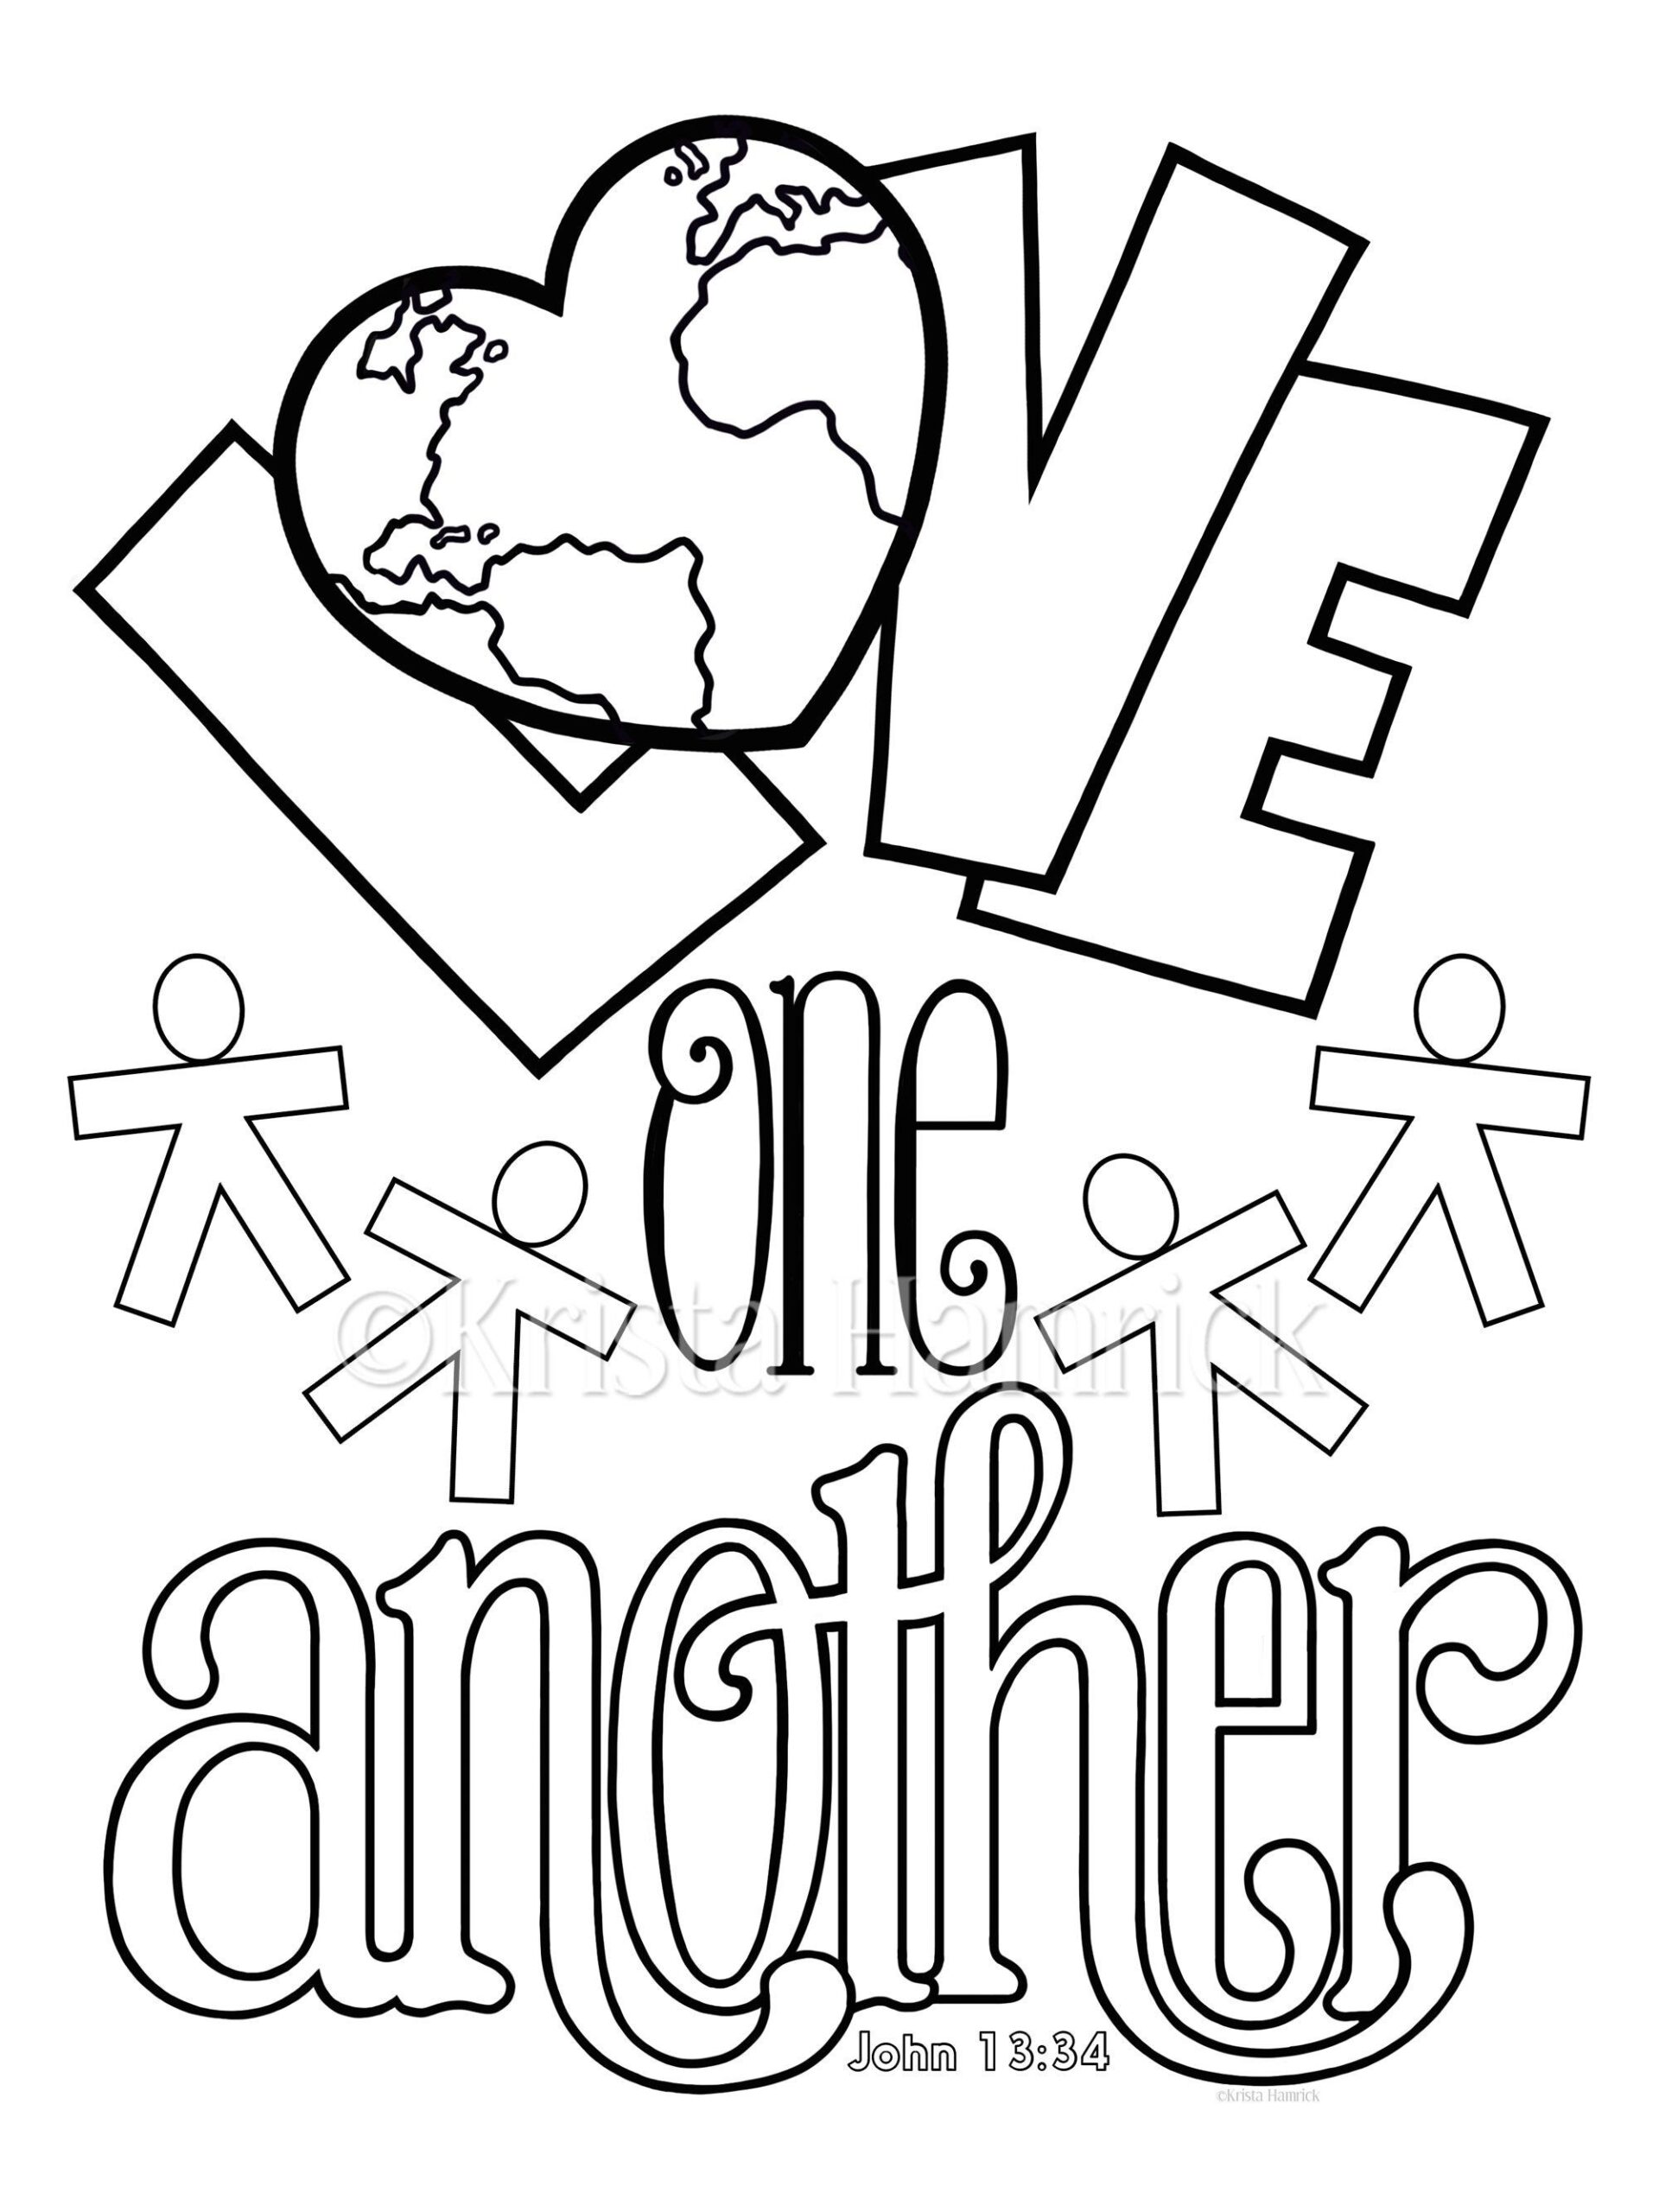 God Is Love Love One Another 2 Coloring Pages For Children Etsy Canada Love Coloring Pages Bible Coloring Pages Bible Coloring